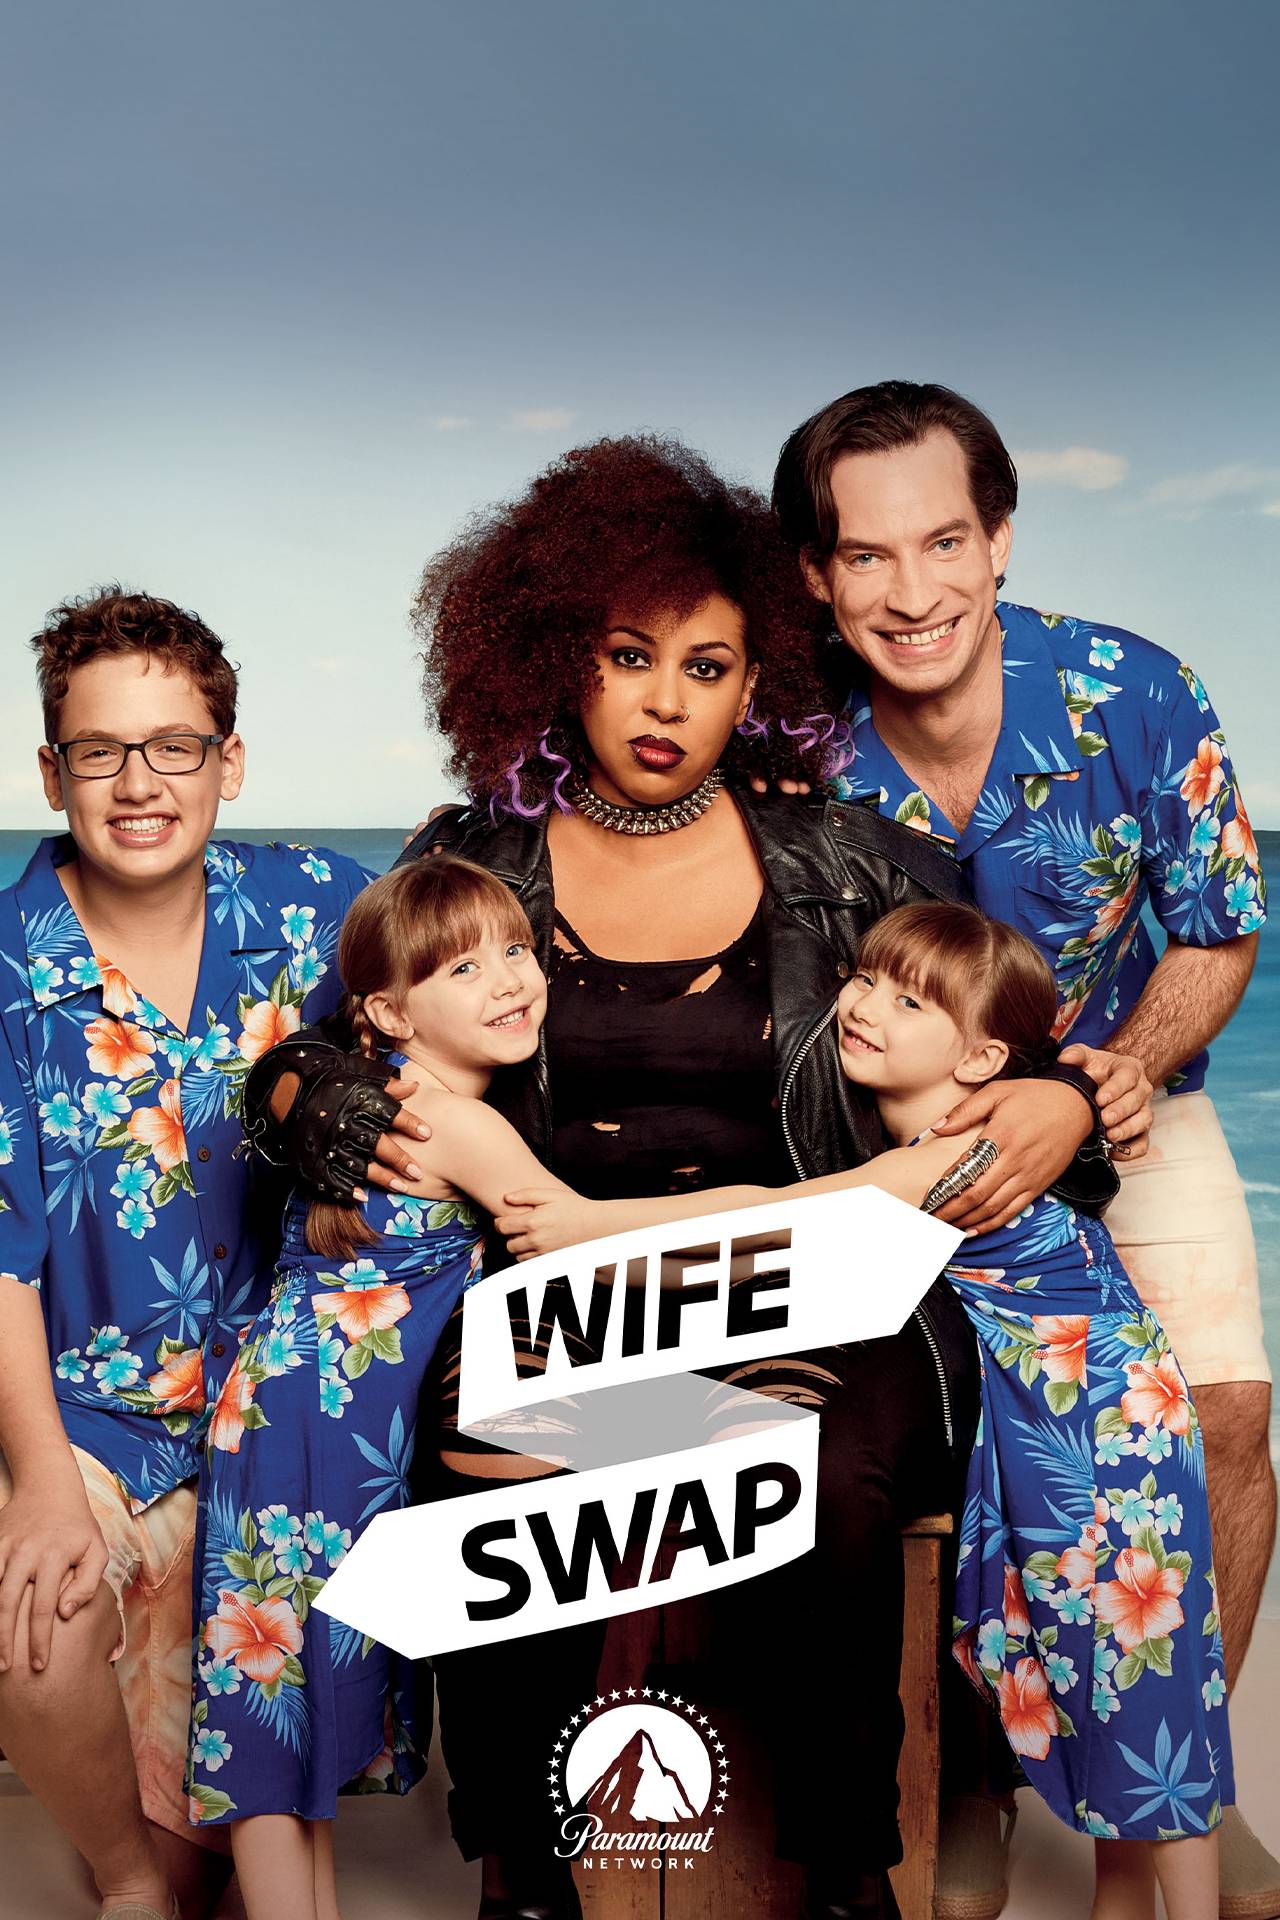 cheryl judge recommends real wife swap tube pic